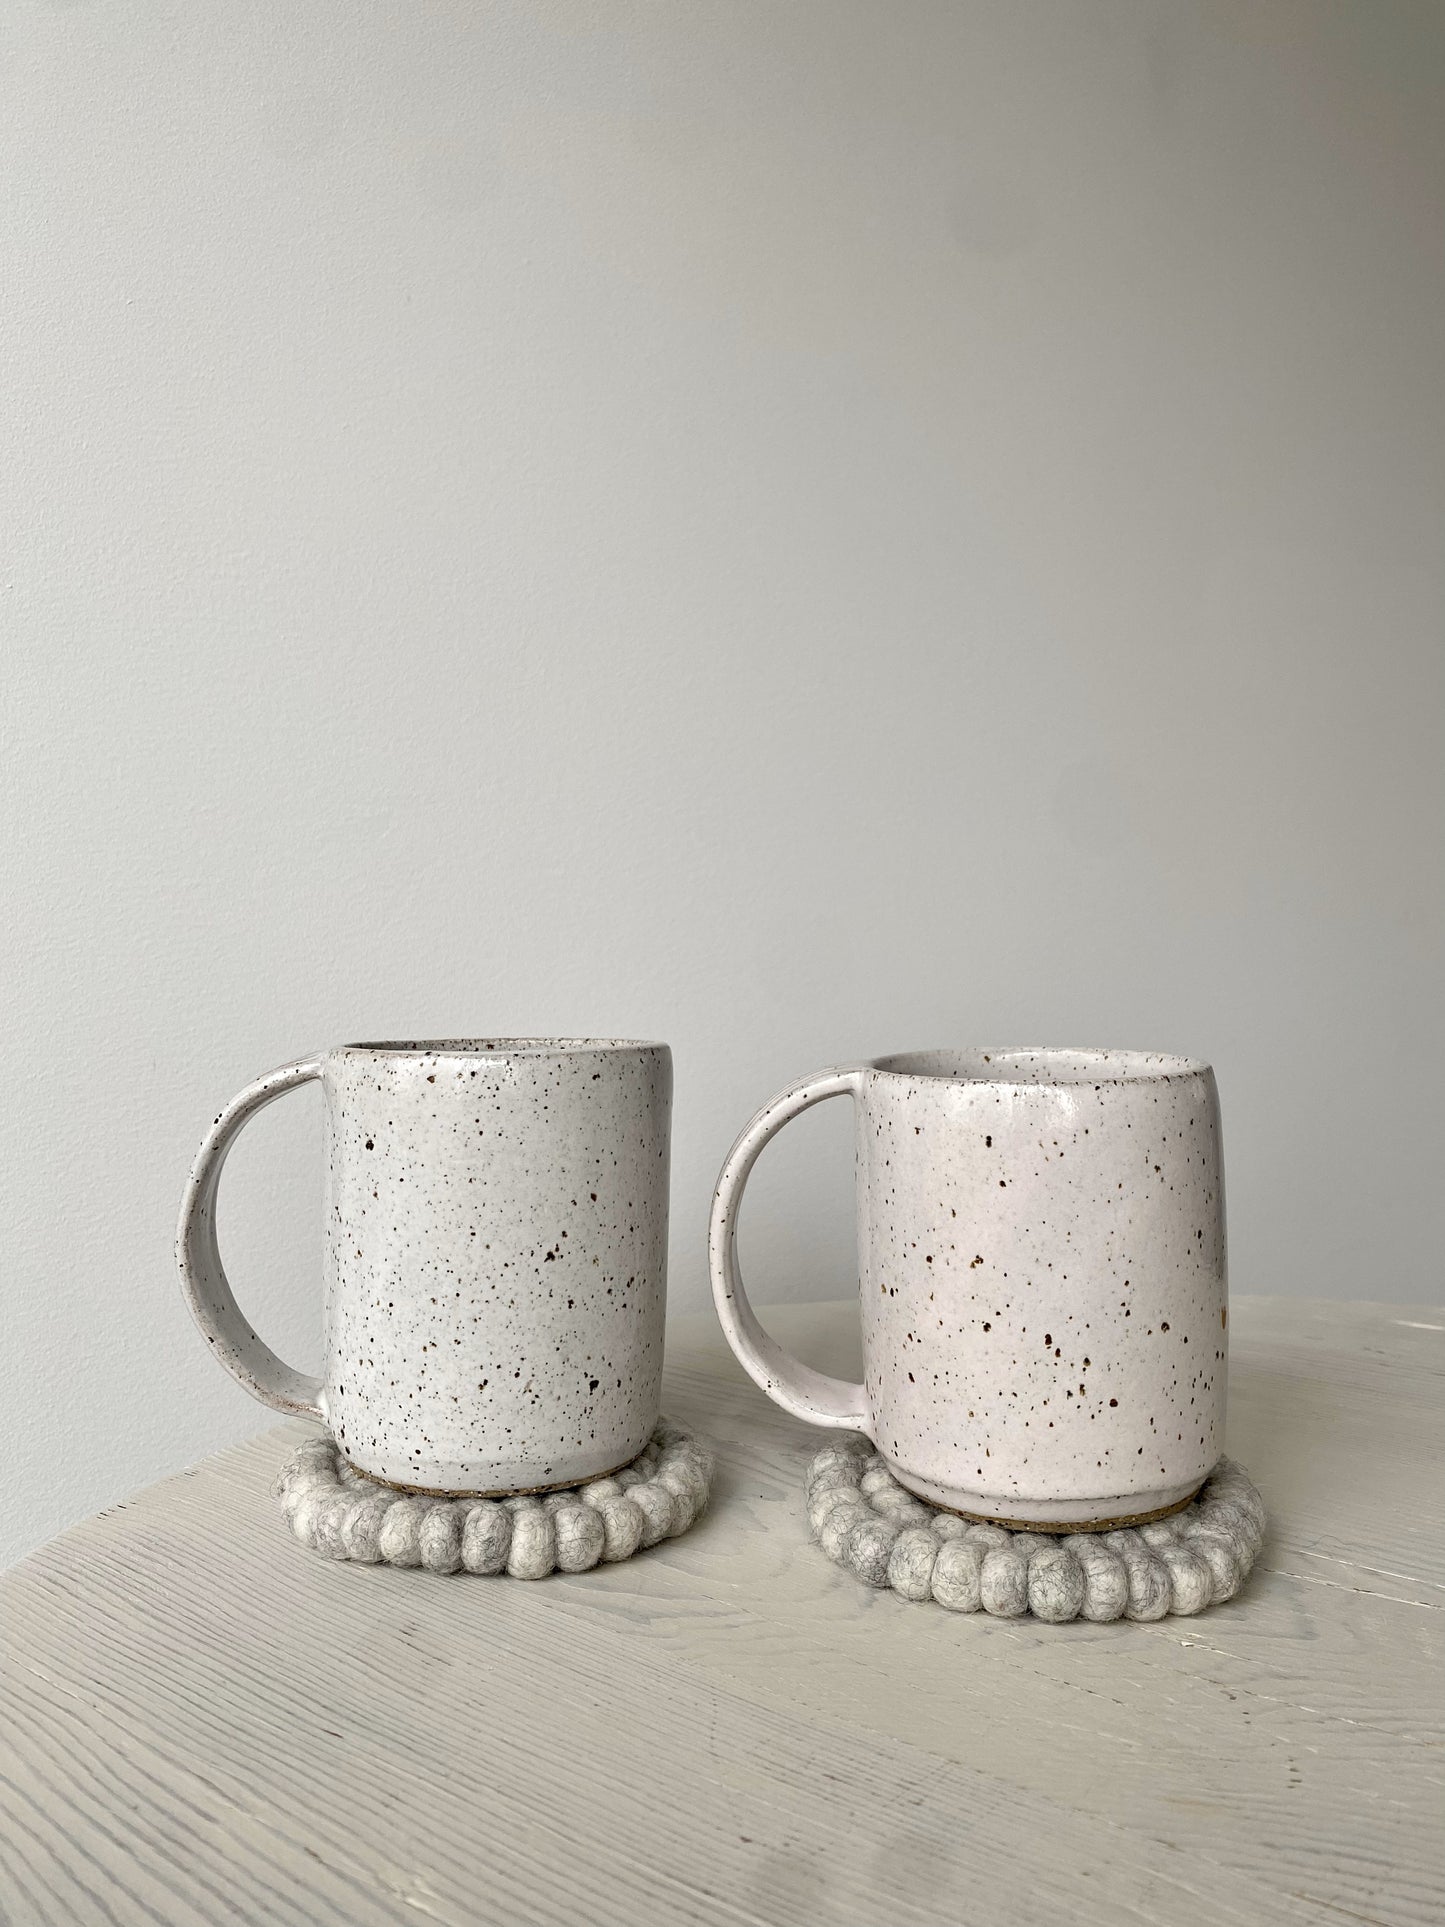 His and Hers Mugs - Set of 2